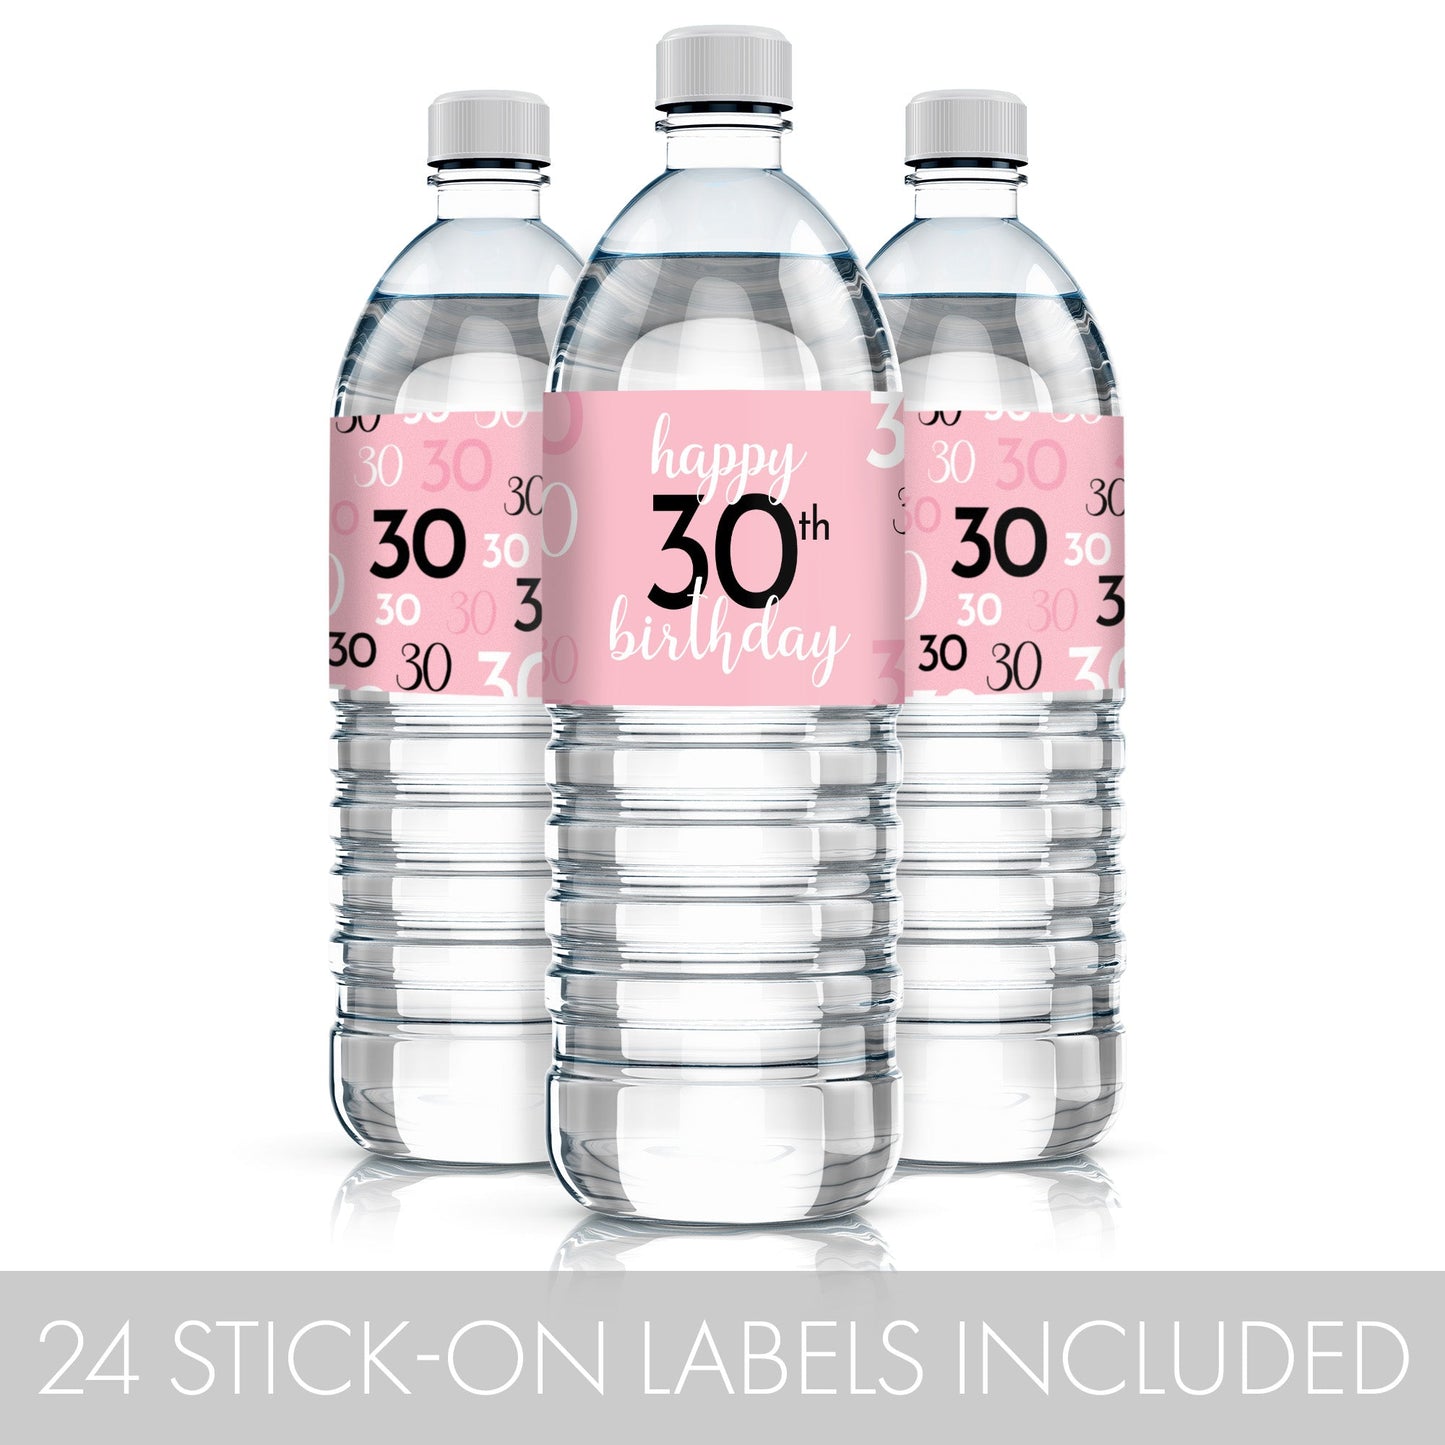 Eye-catching 30th birthday water bottle labels in pink and black with easy peel-and-stick application